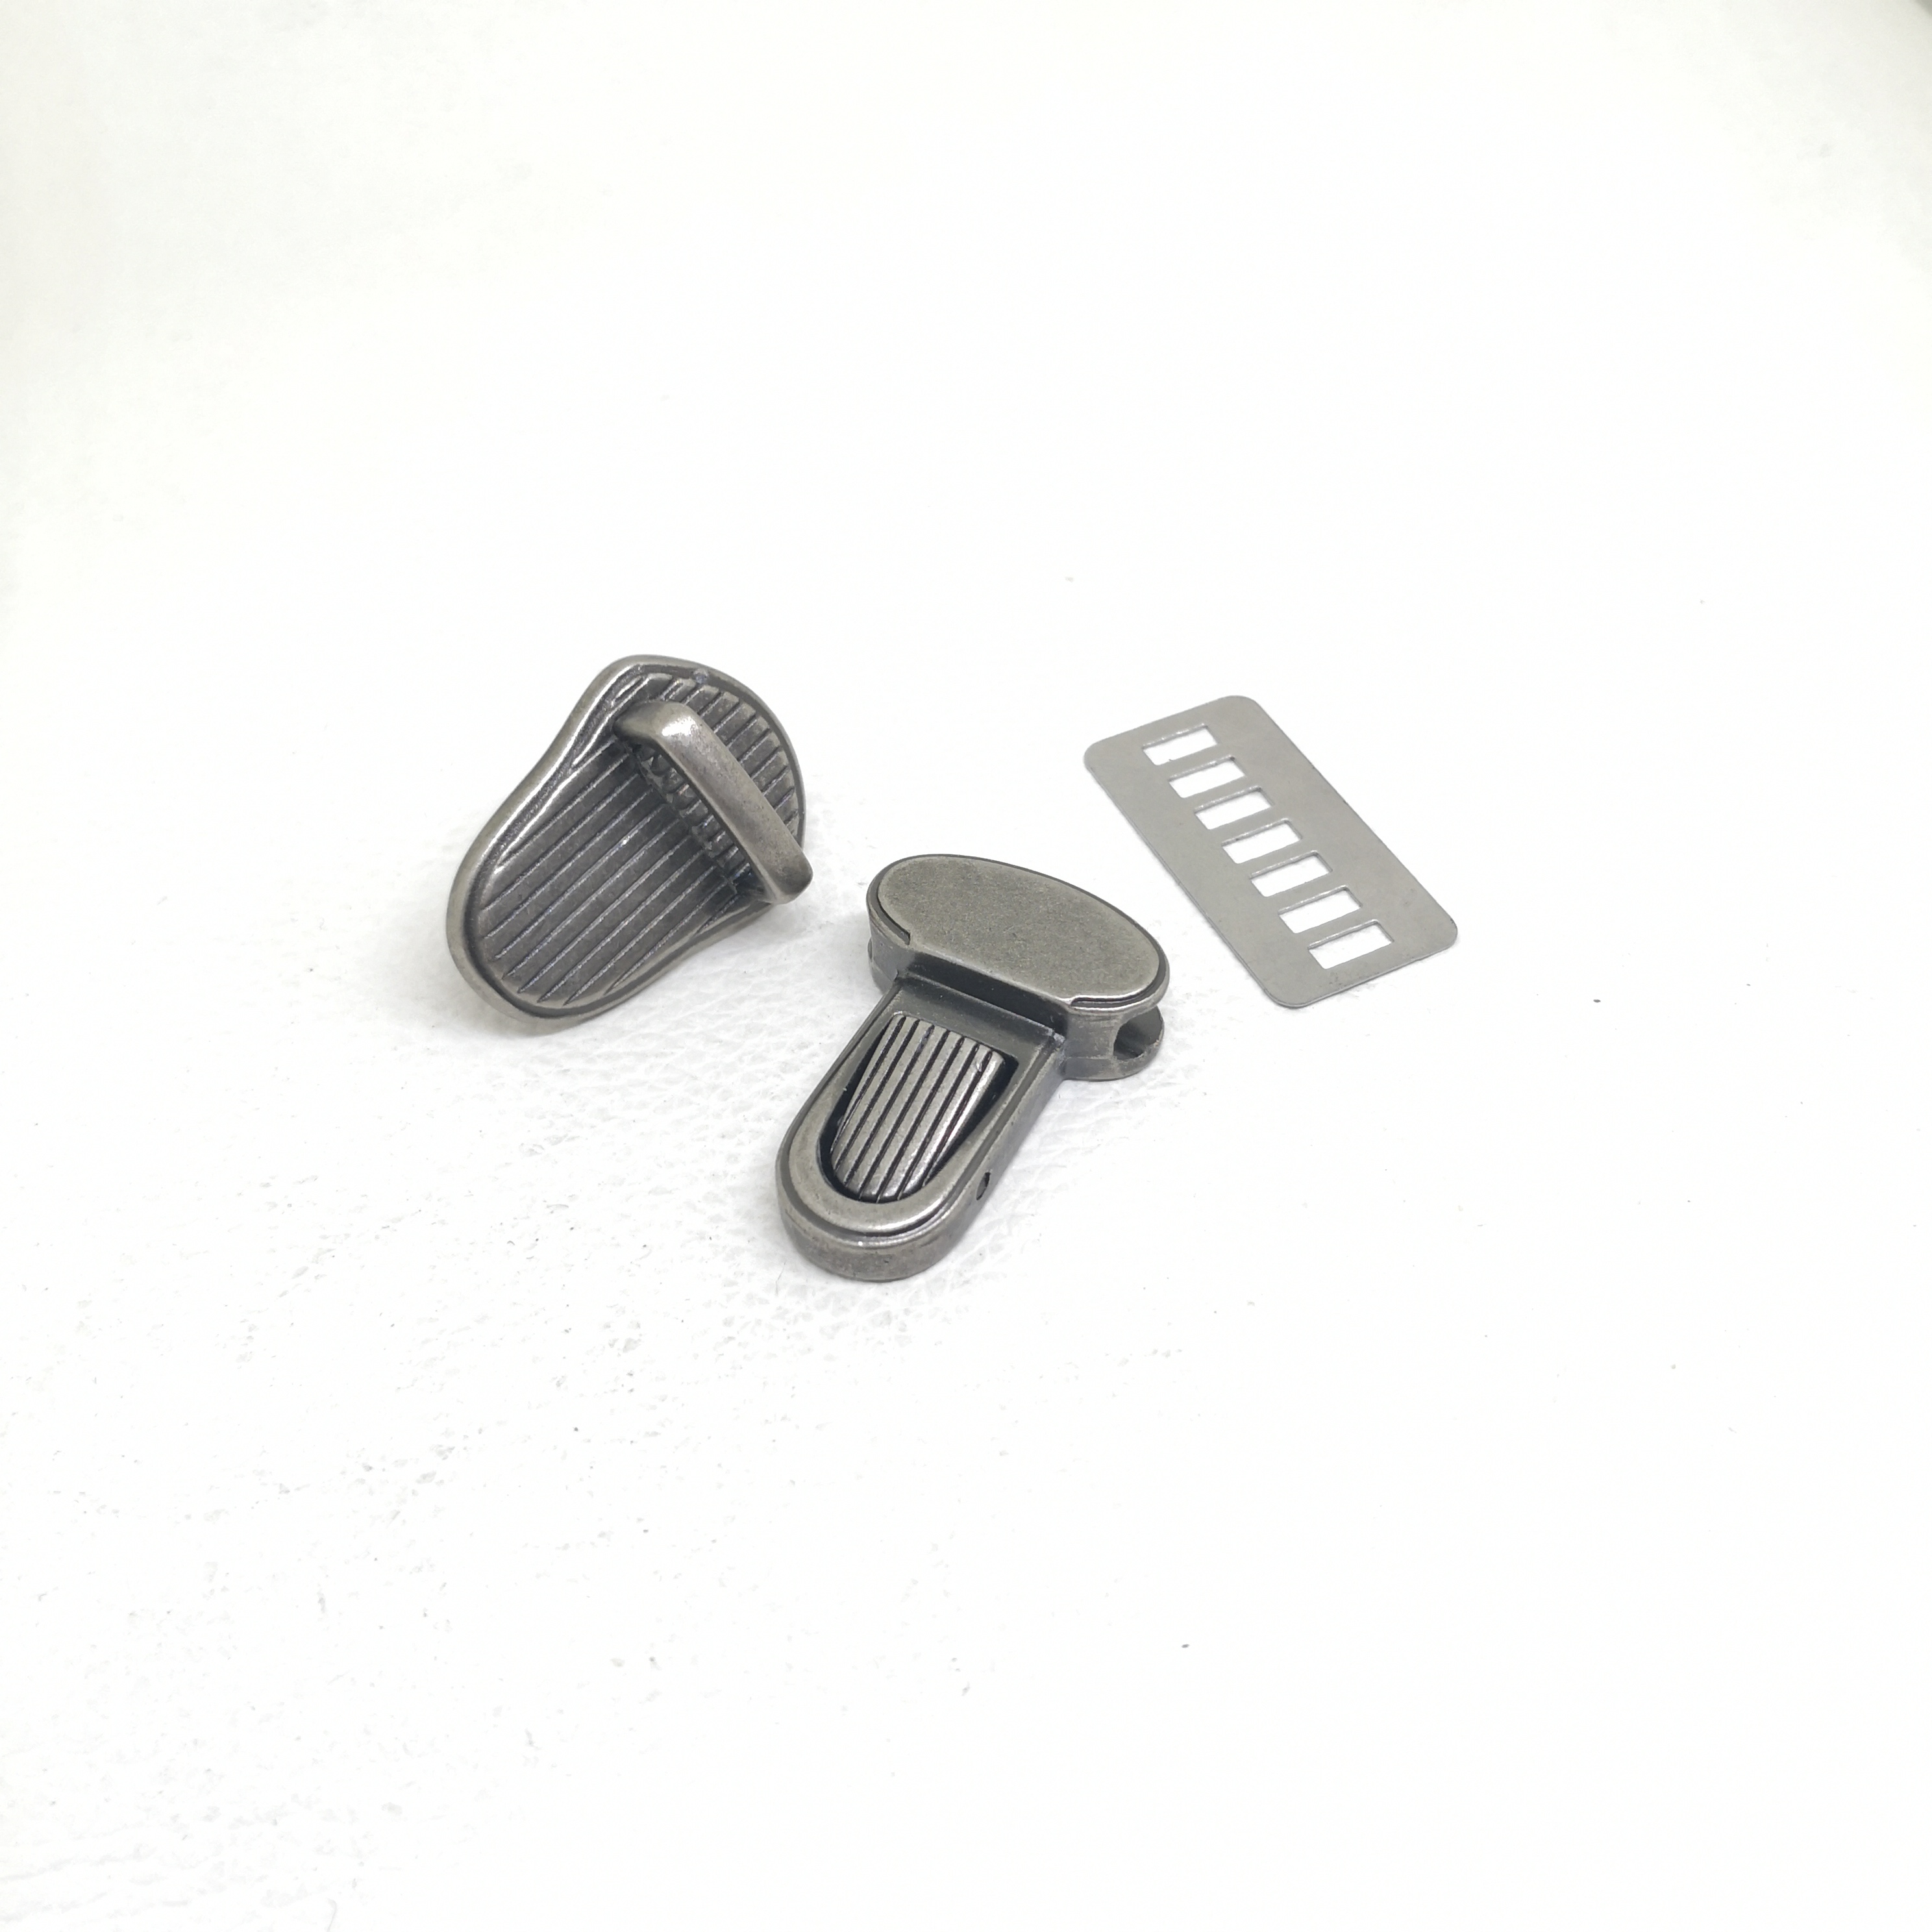 22mm (In-Belt Width) Small Zinc Alloy Metal Push Snap Lock for Handbag / Leather-Made / D.I.Y Use